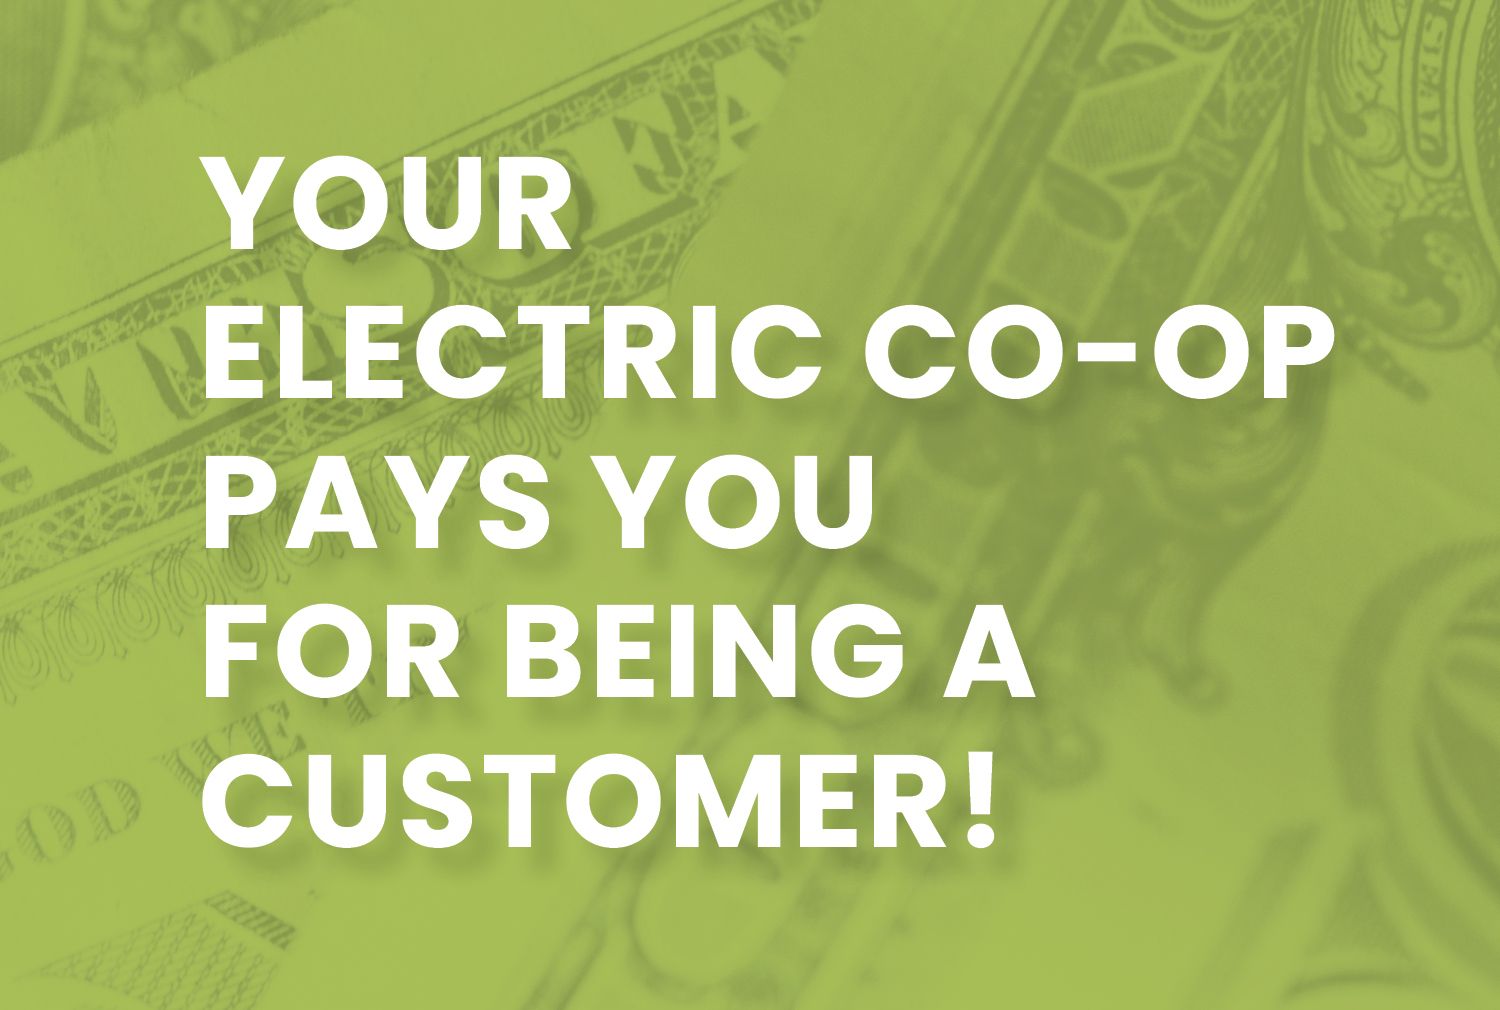 Your electric co-op pays you for being a customer